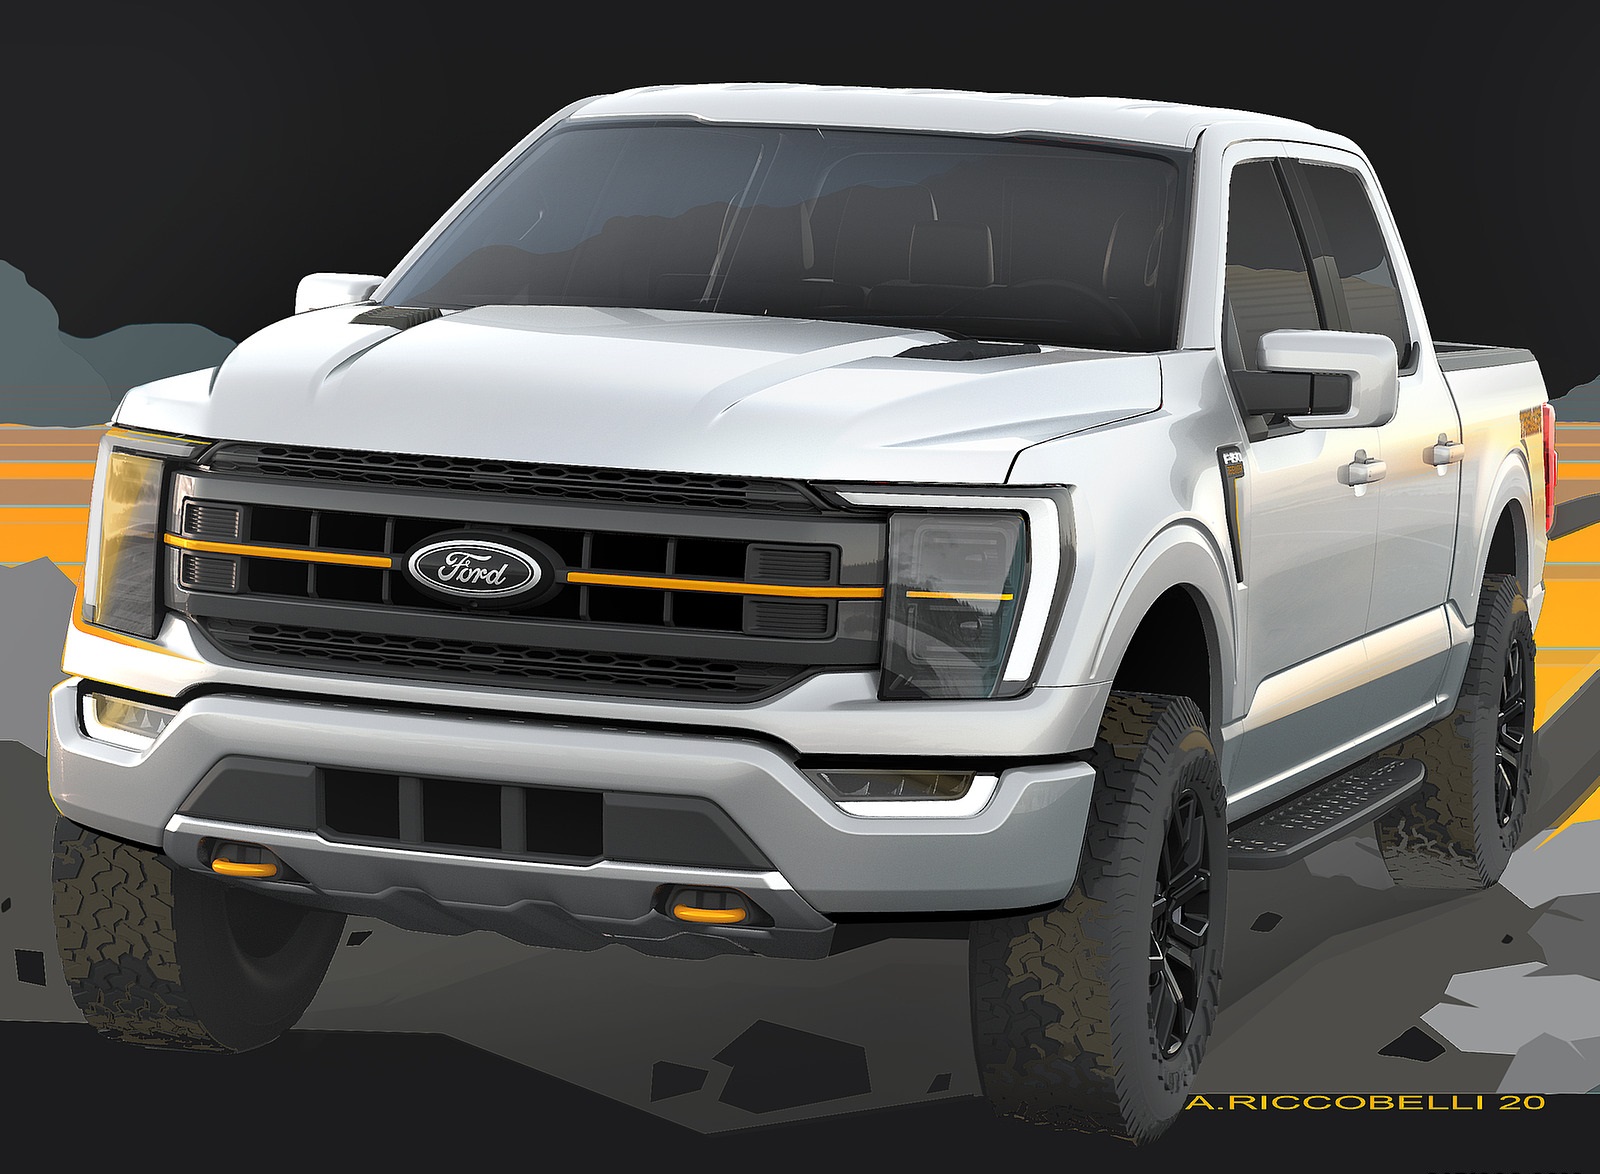 2021 Ford F-150 Tremor Design Sketch Wallpapers #25 of 26